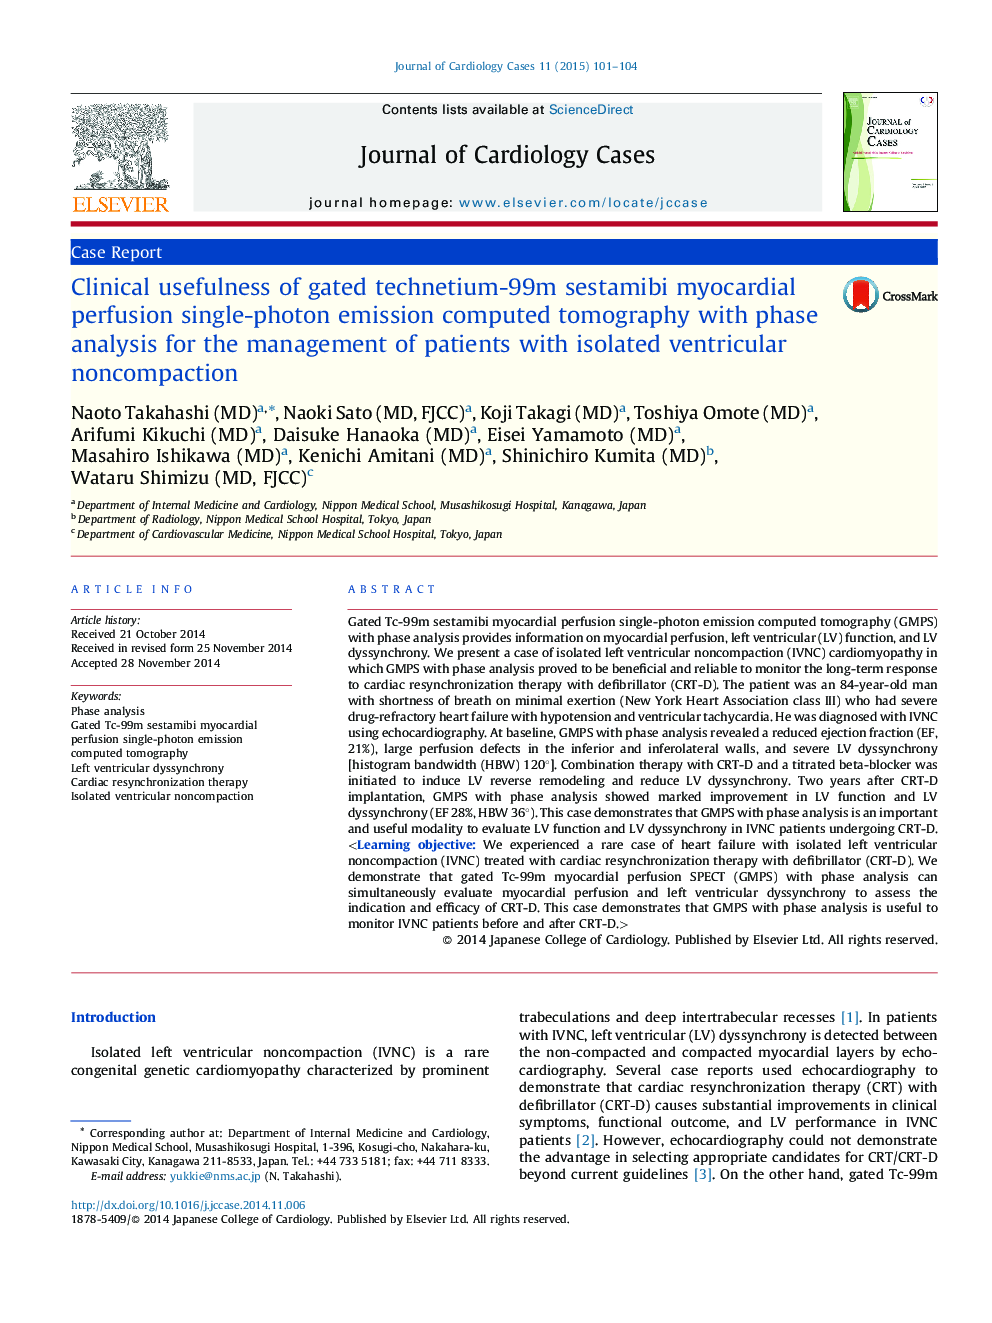 Clinical usefulness of gated technetium-99m sestamibi myocardial perfusion single-photon emission computed tomography with phase analysis for the management of patients with isolated ventricular noncompaction